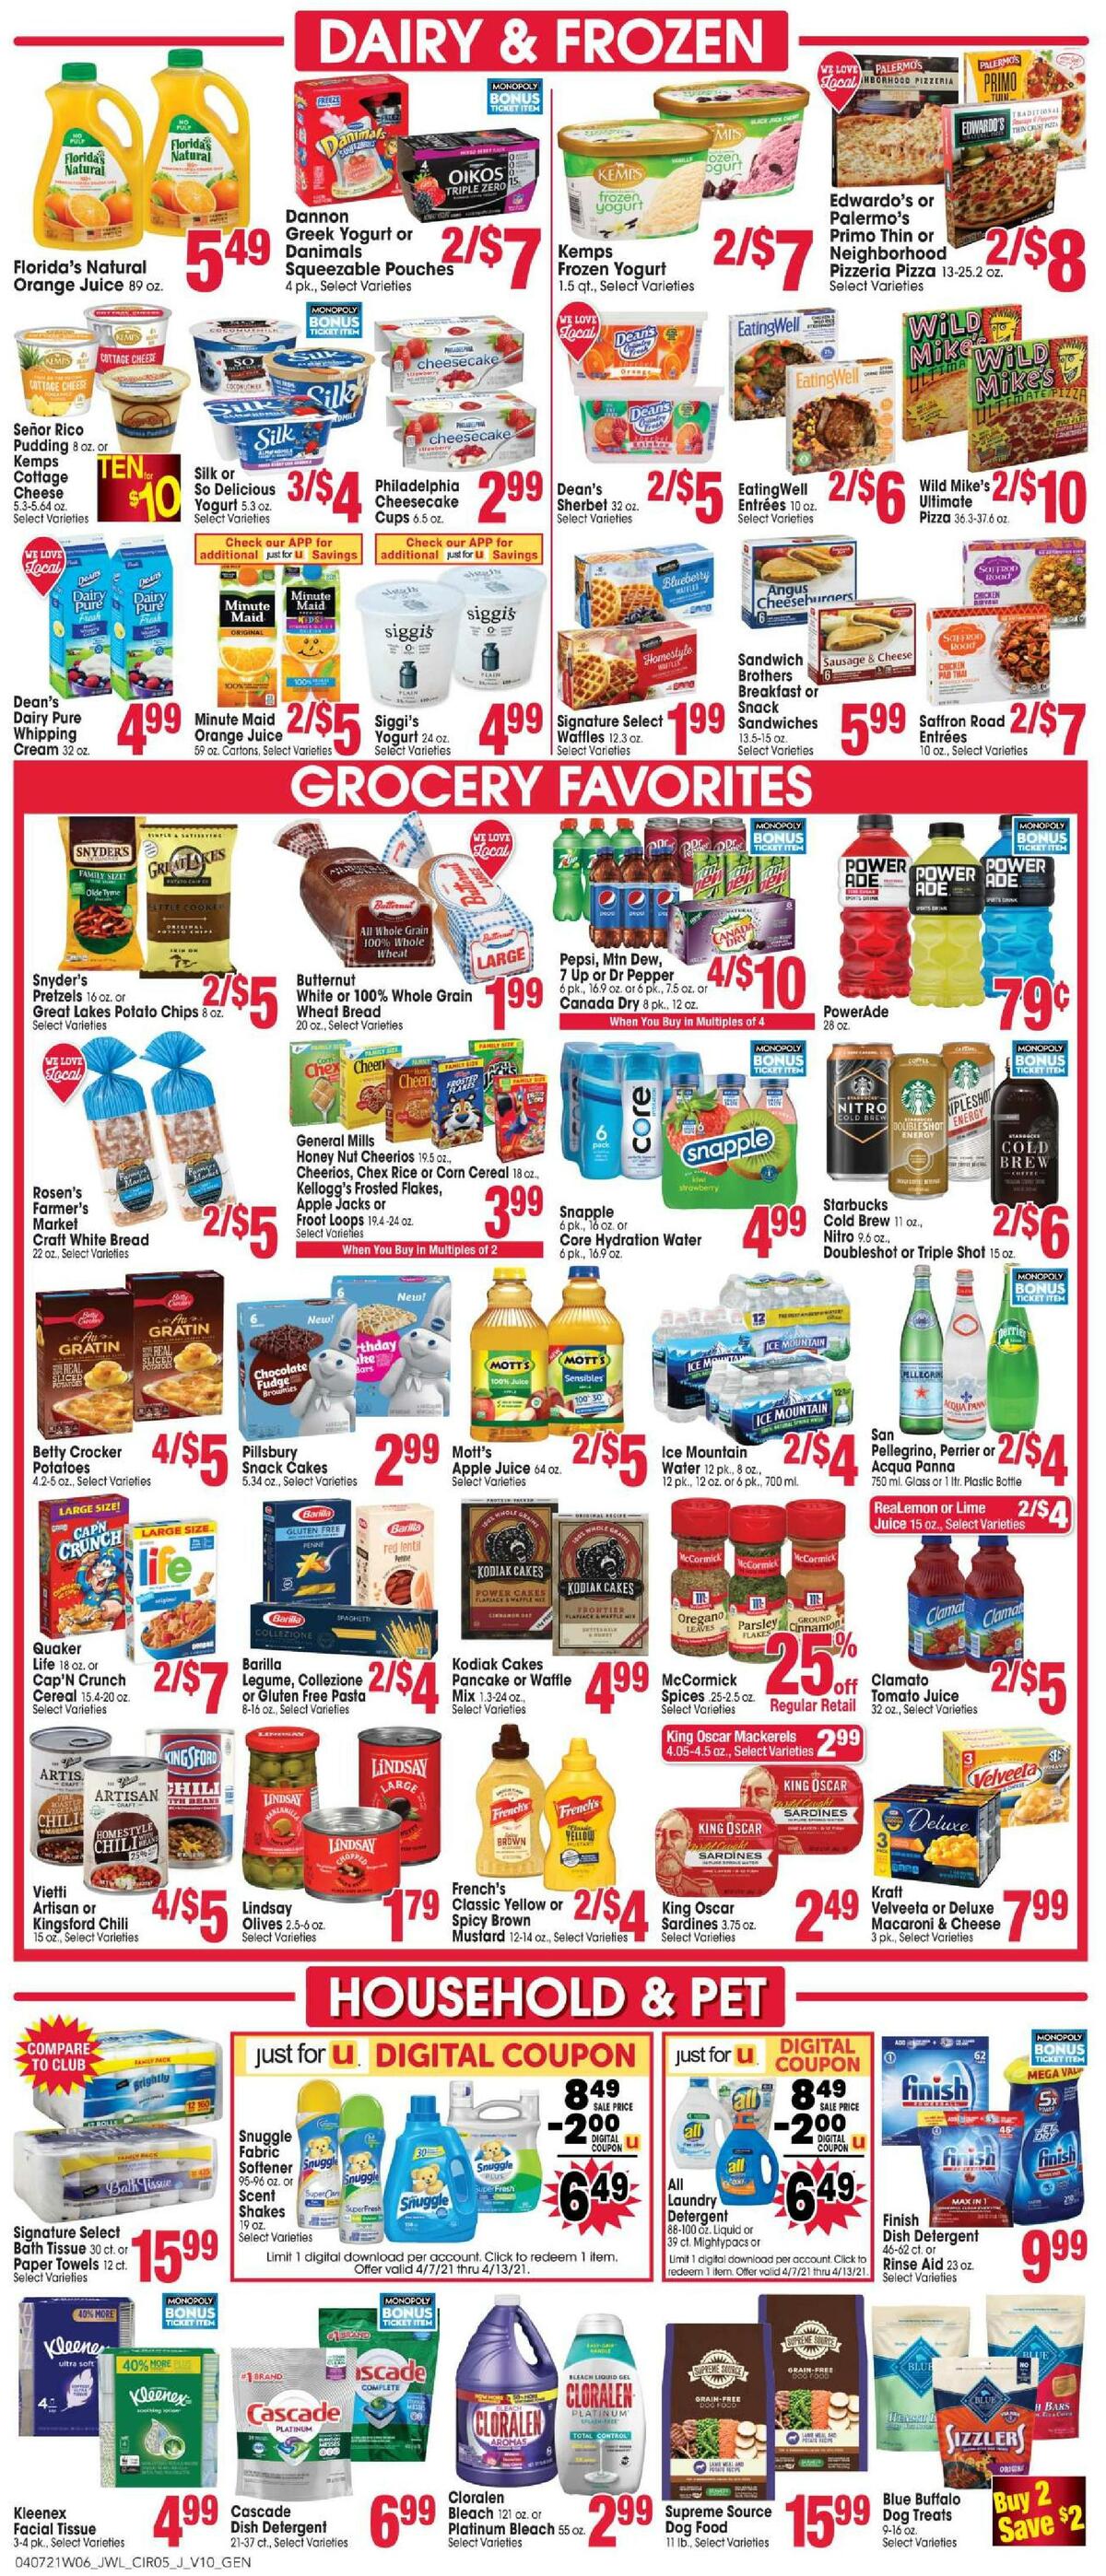 Jewel Osco Weekly Ad from April 7